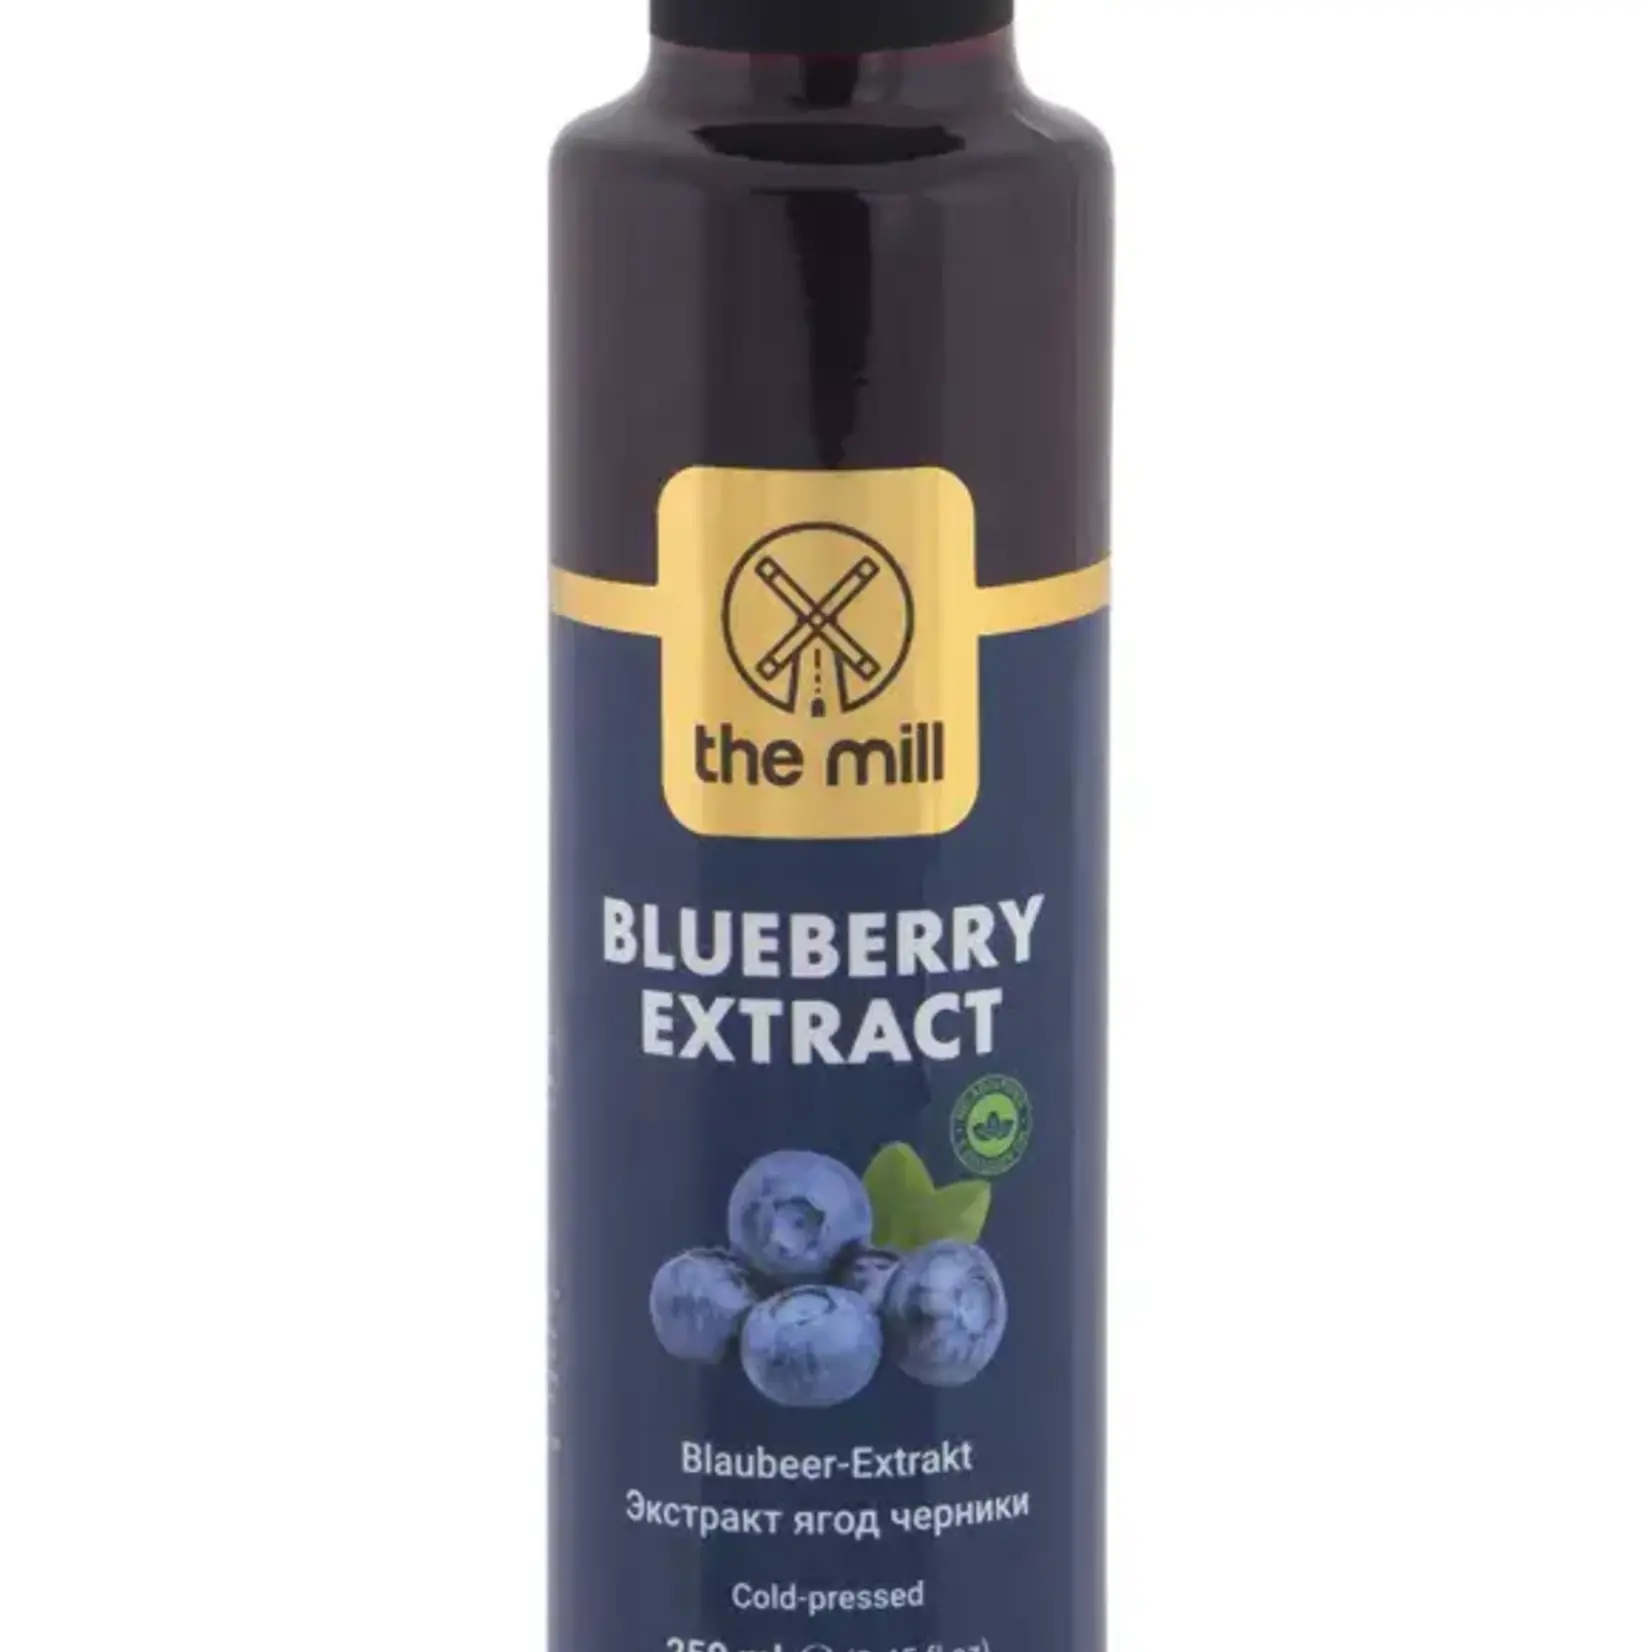 THE MILL THE MILL 250ML BLEUBERRY EXTRACT